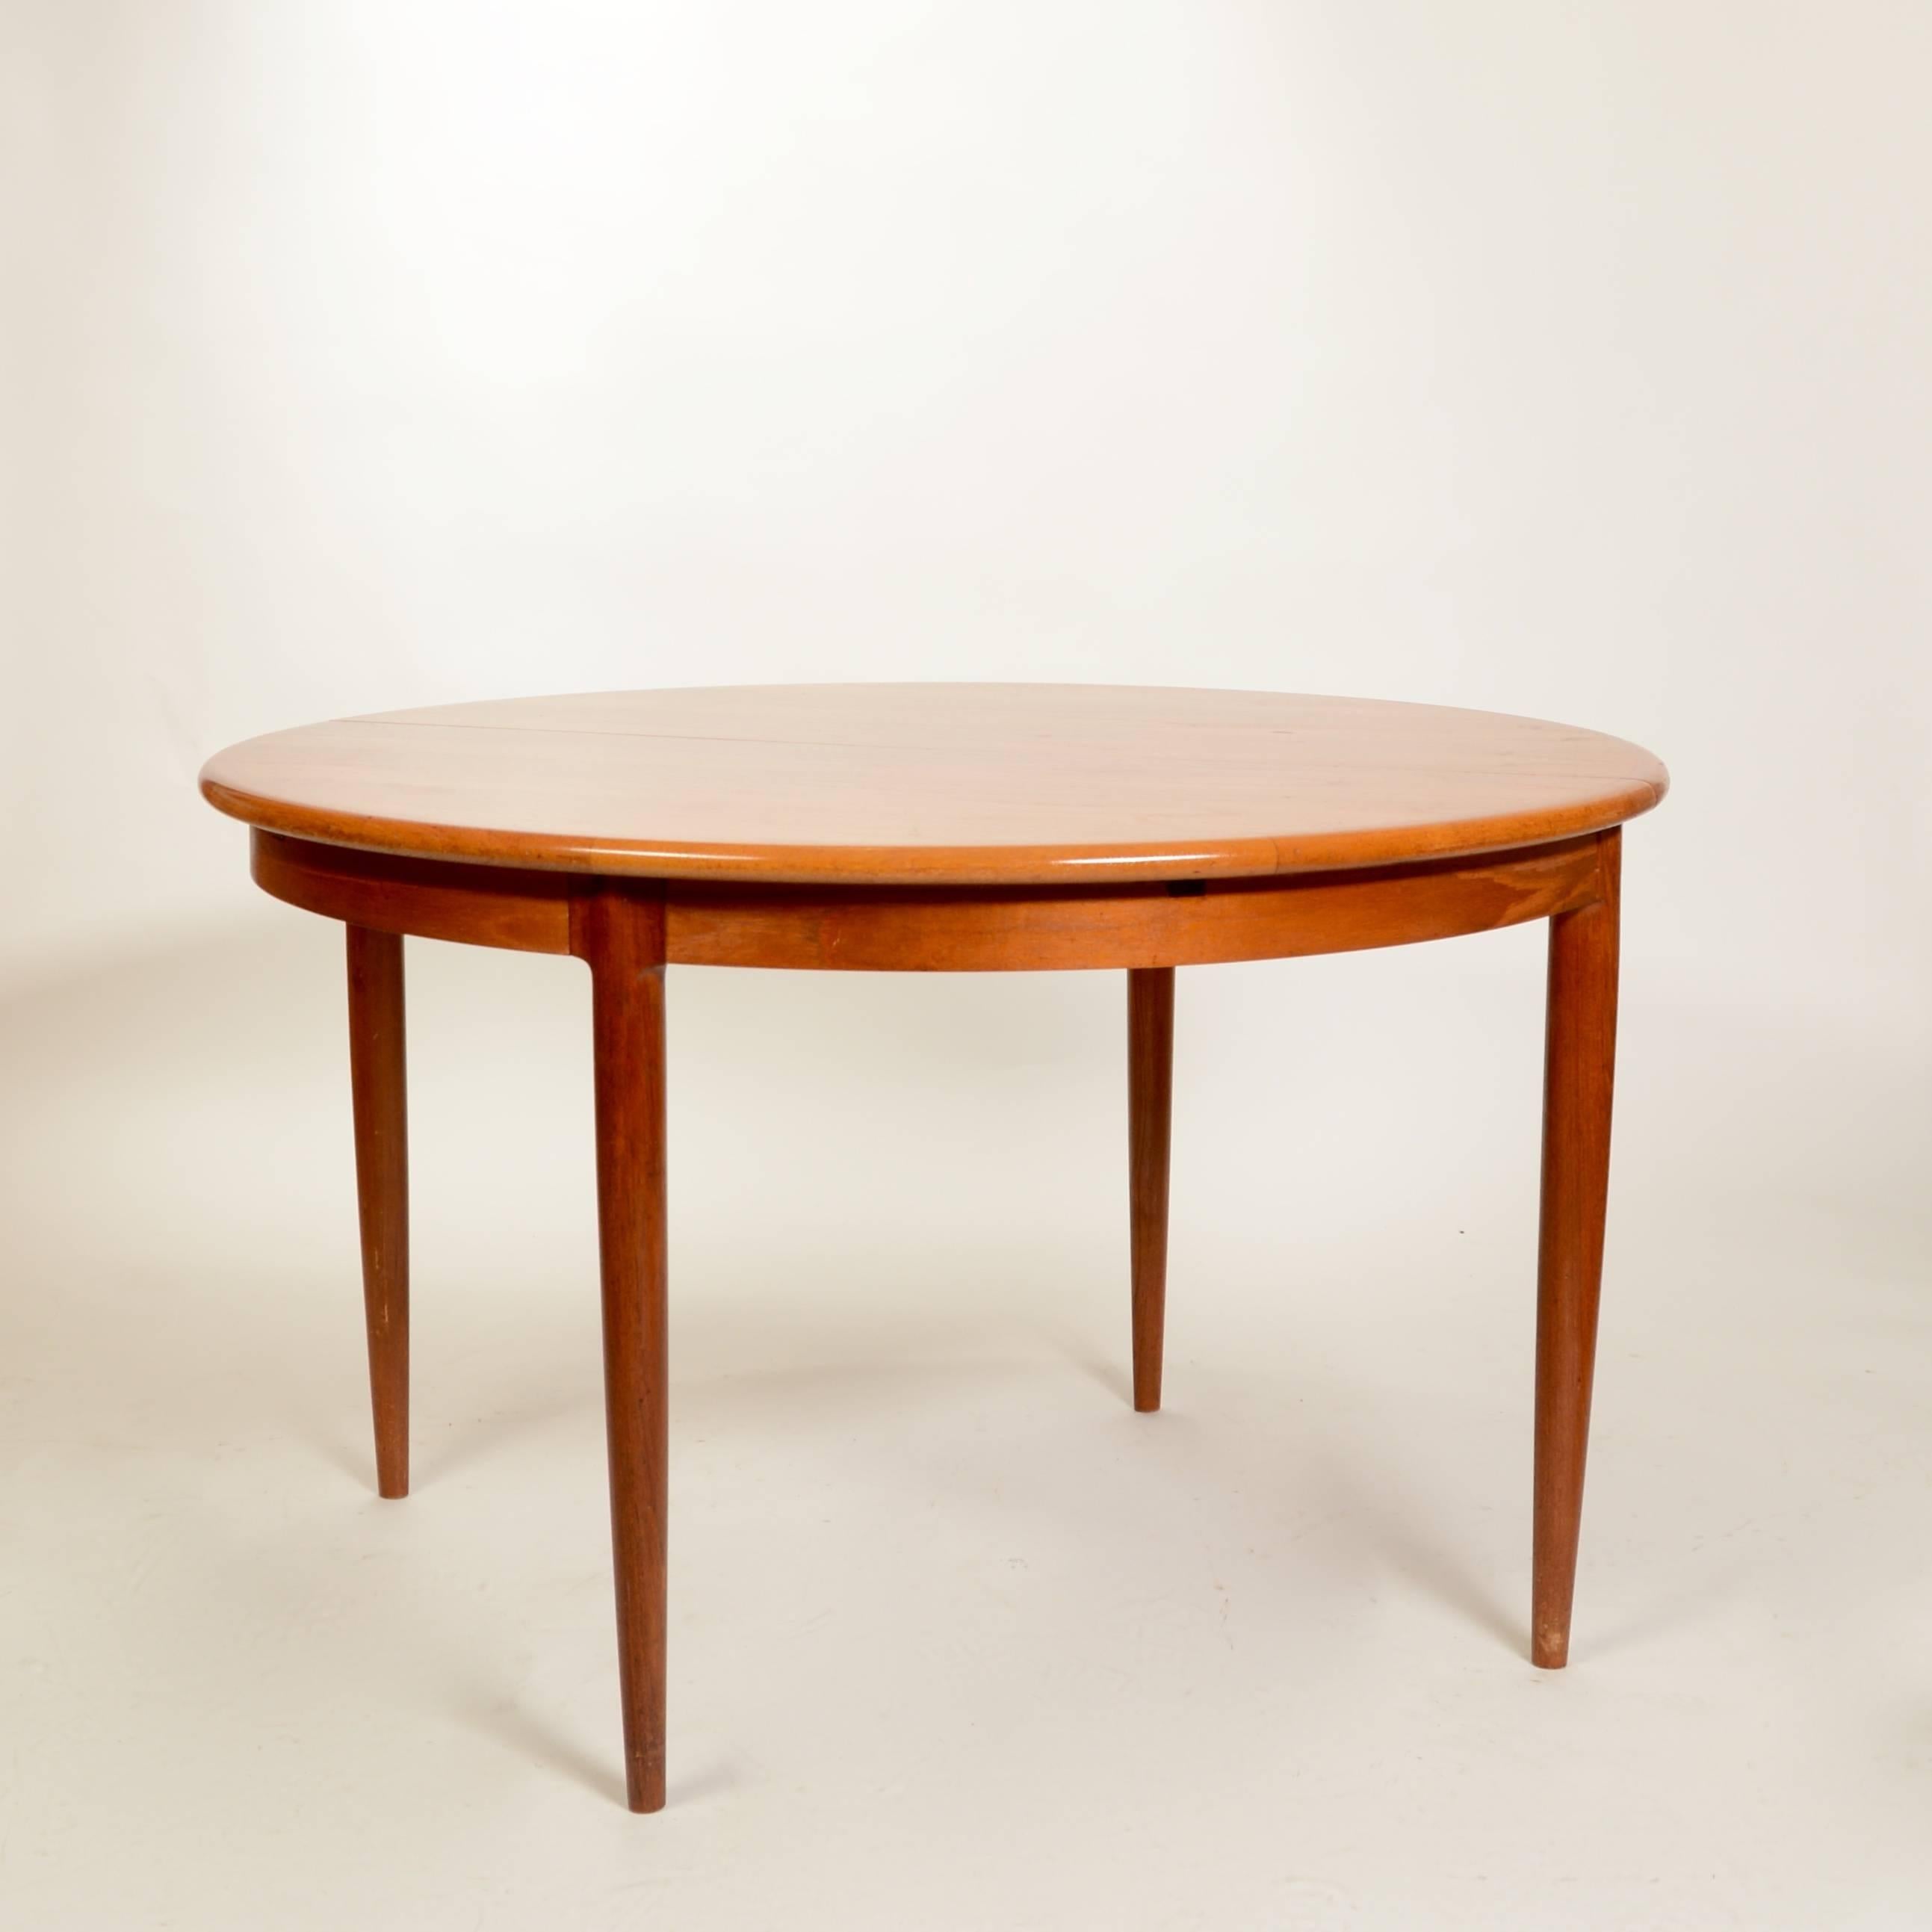 Niels Moller for J Moller #15 dining table in Teak.  The table is in great condition and beautifully selected teak veneer.  The 20